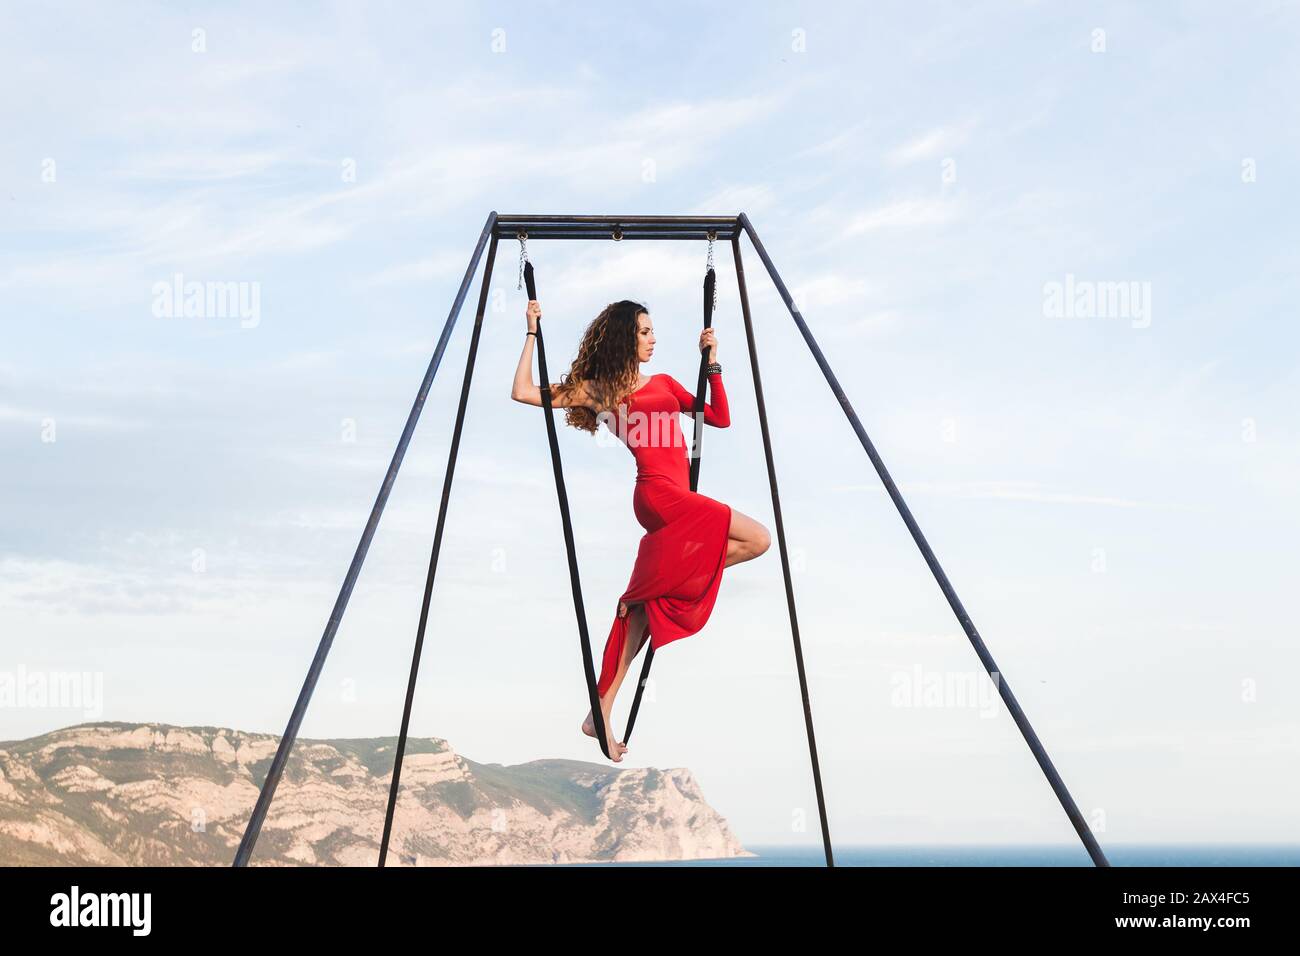 Woman in red dress practicing pole fly dance poses in a hammock outdoor with a mountain view. Female sports, wellbeing concept. Pilates outdoors. Stock Photo